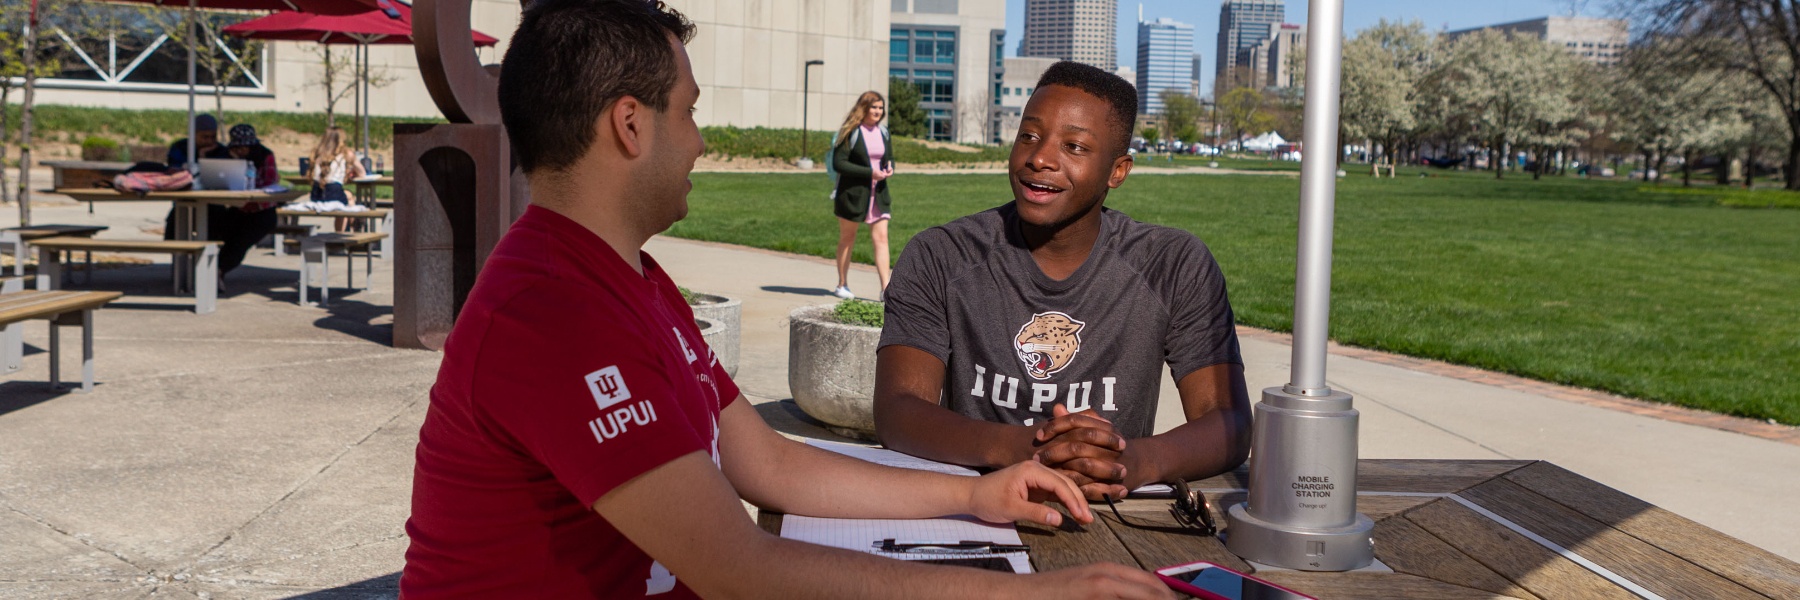 IUPUI student having a meeting with an IUPUI employee while outside